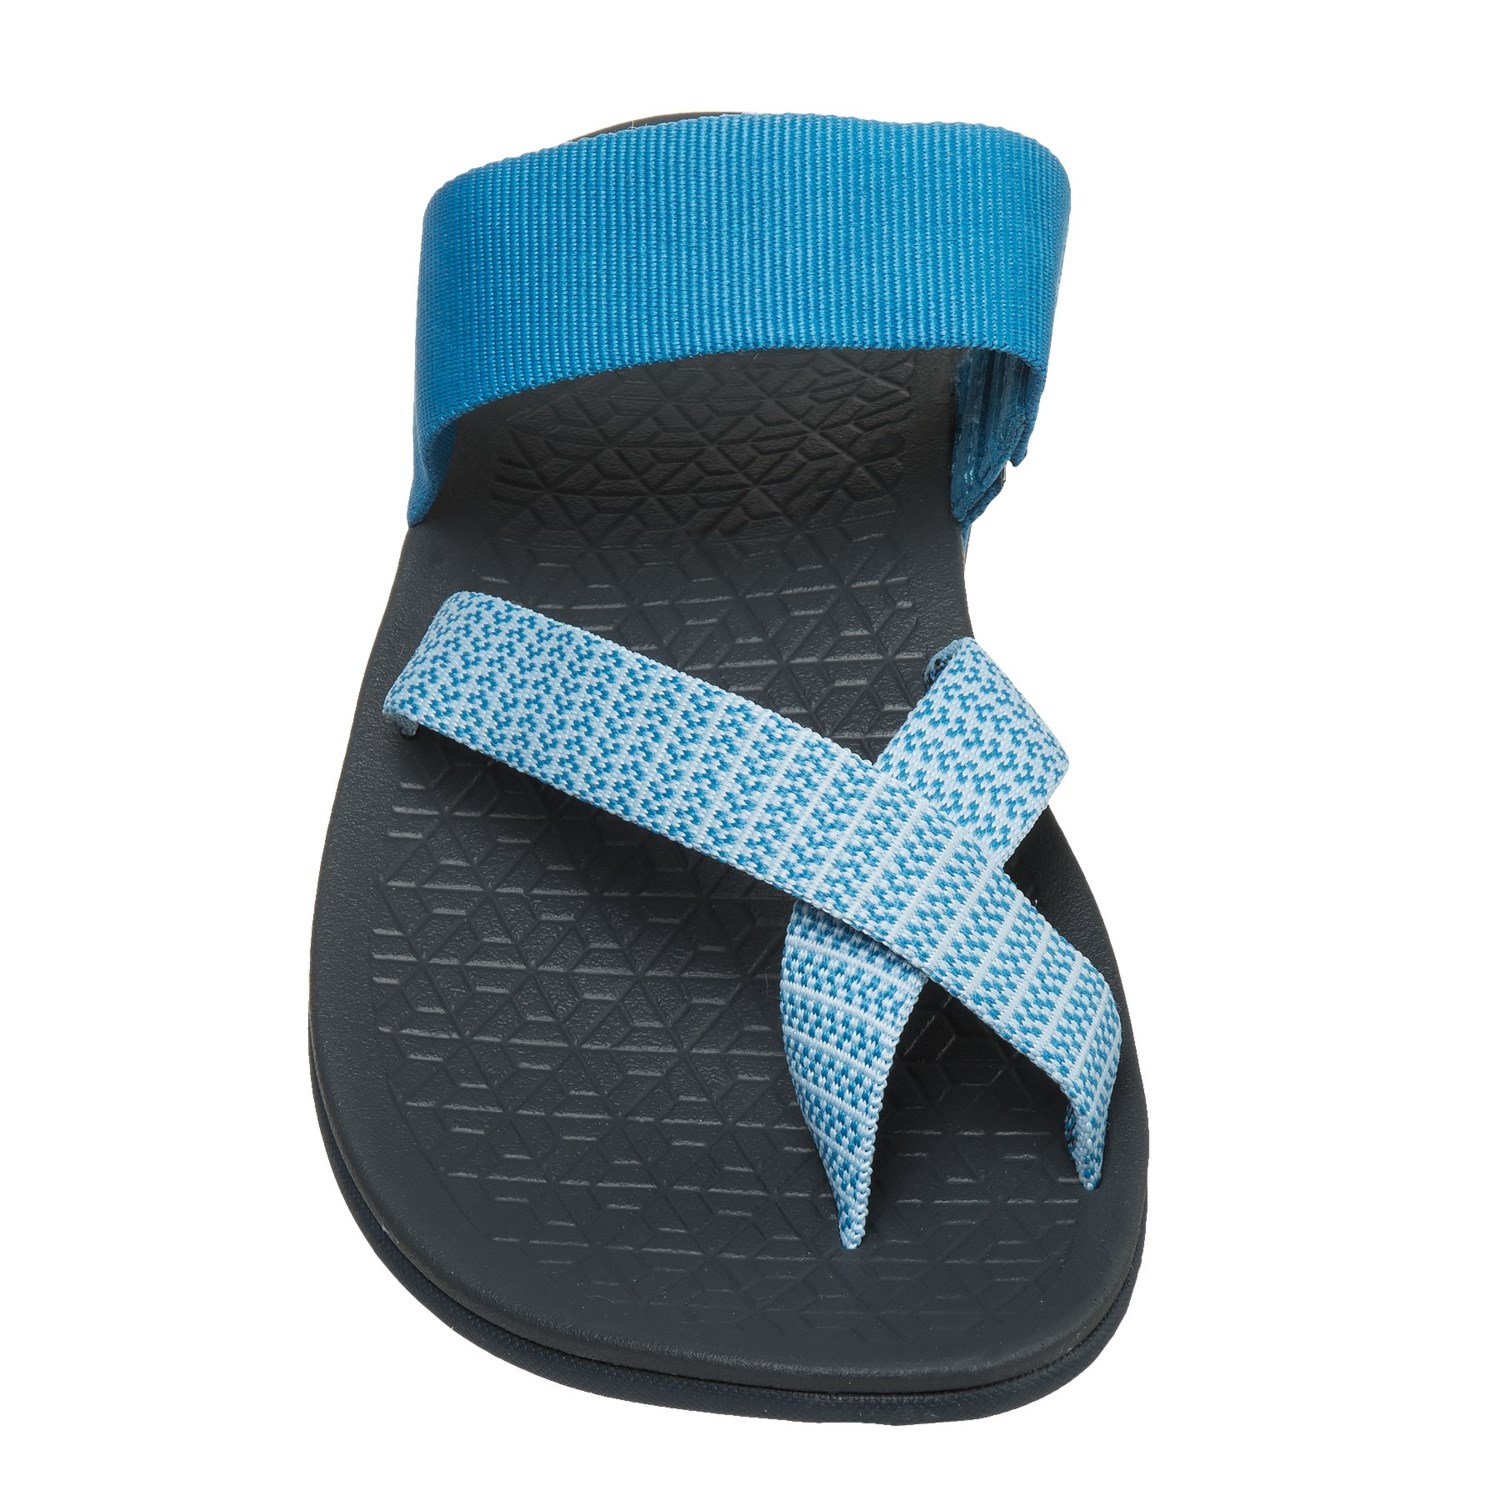 Chaco Tetra Cloud Sandals (For Women) - Save 37%